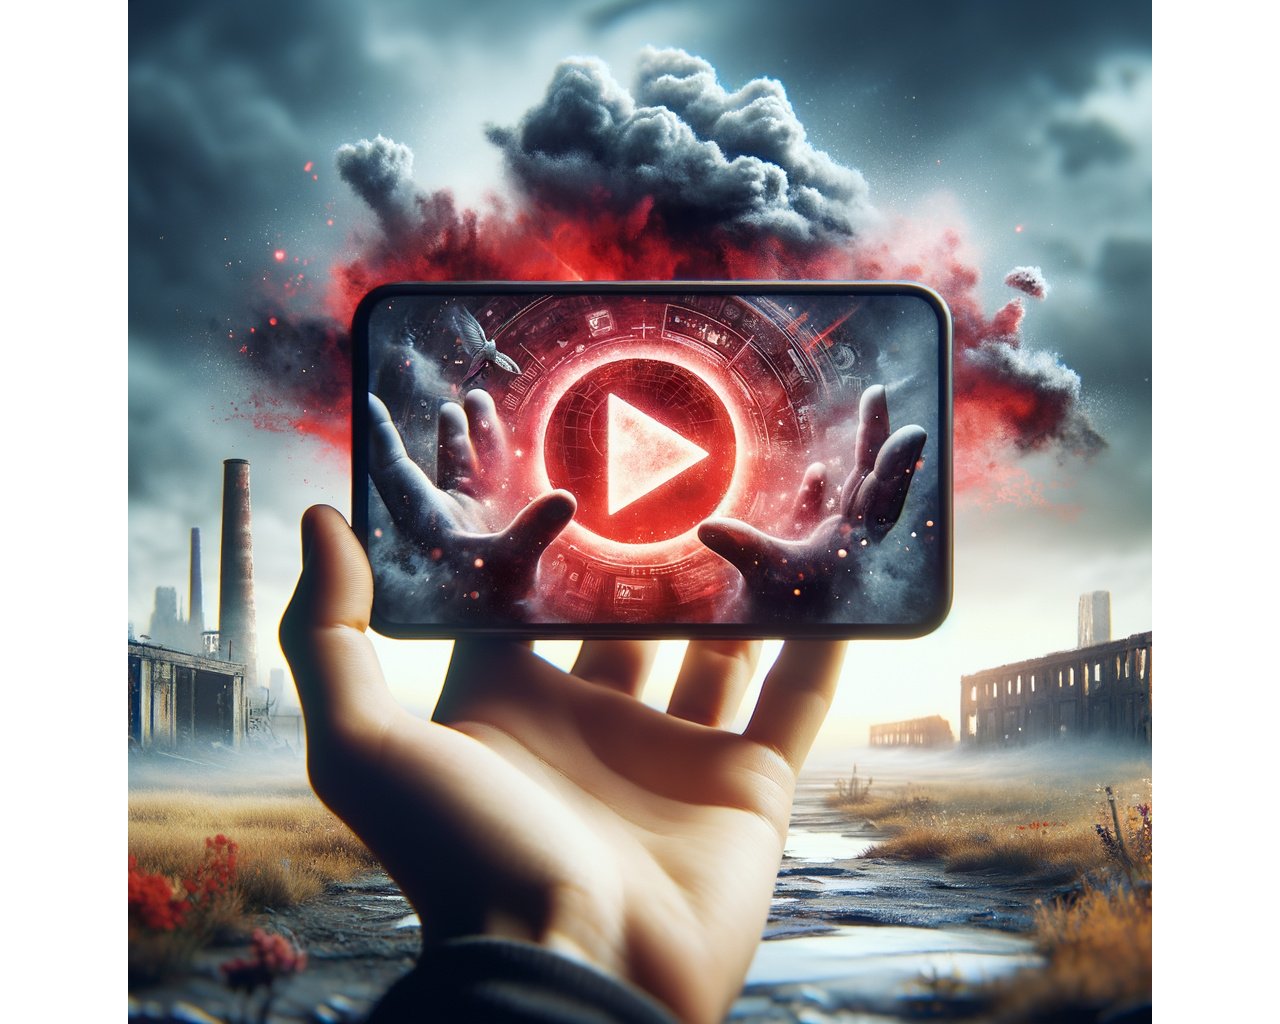 YouTube climate change deniers have recently seen a shift in their stance, as new disinformation campaigns emerge to generate significant profits.